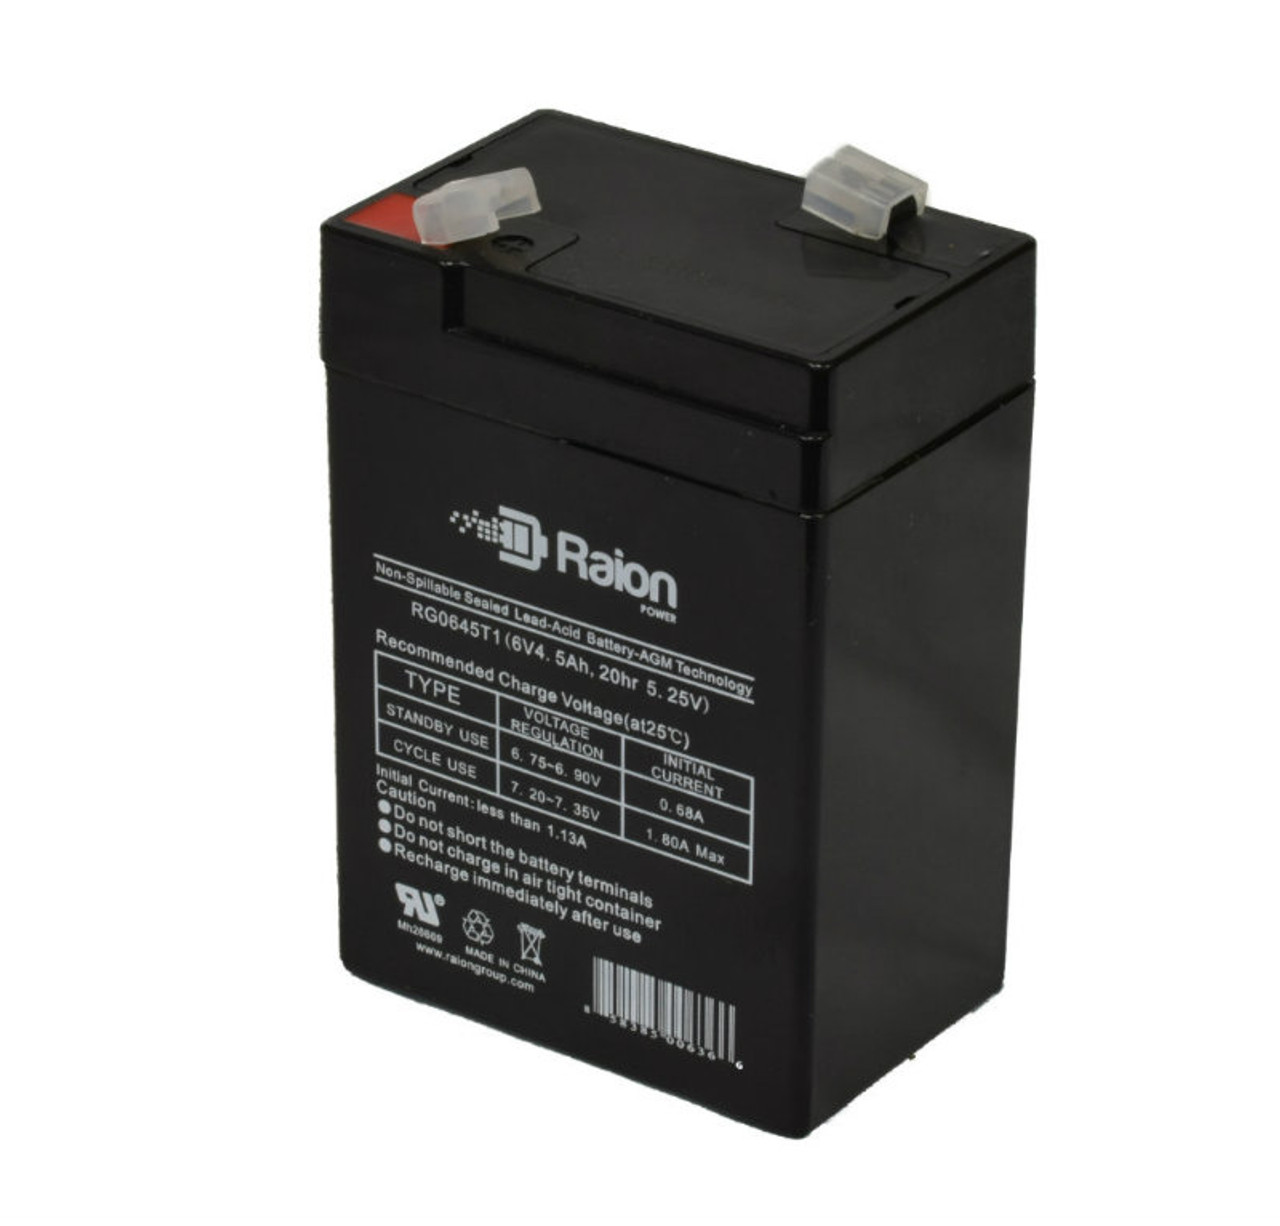 Raion Power RG0645T1 6V 4.5Ah Replacement Battery Cartridge for FengSheng FS6-4